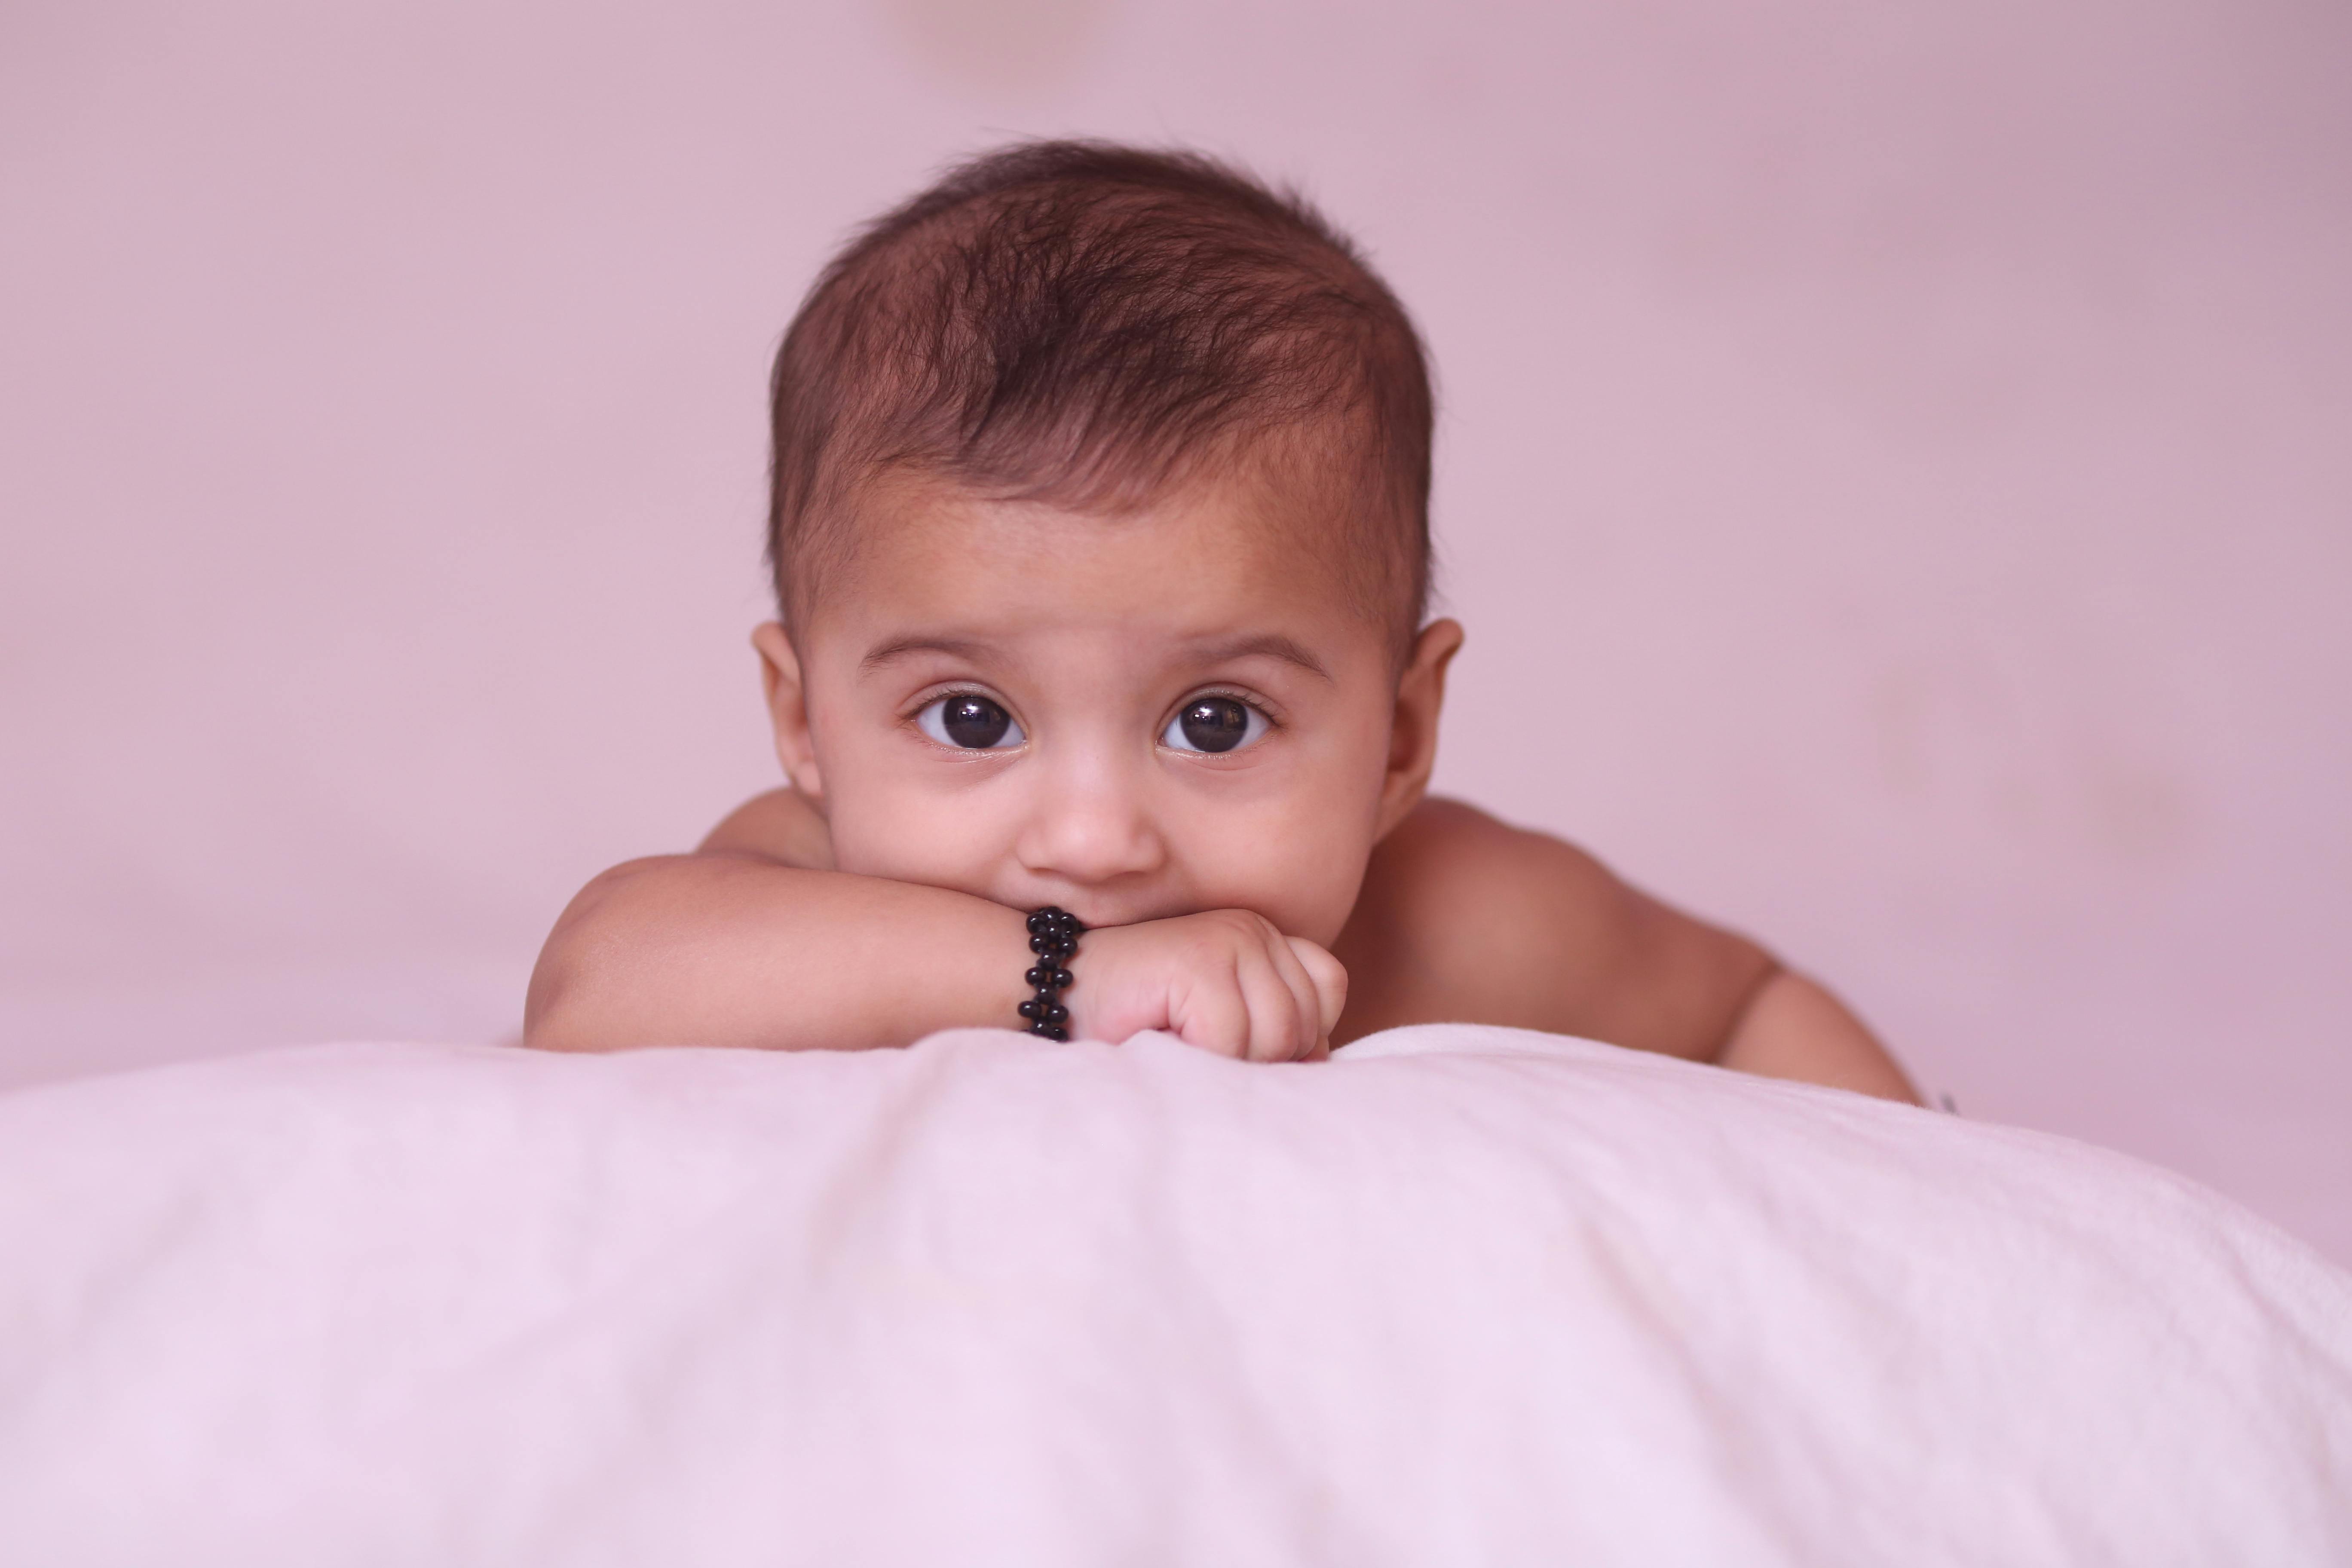 Topless Baby Lying on White Bed \u00b7 Free Stock Photo